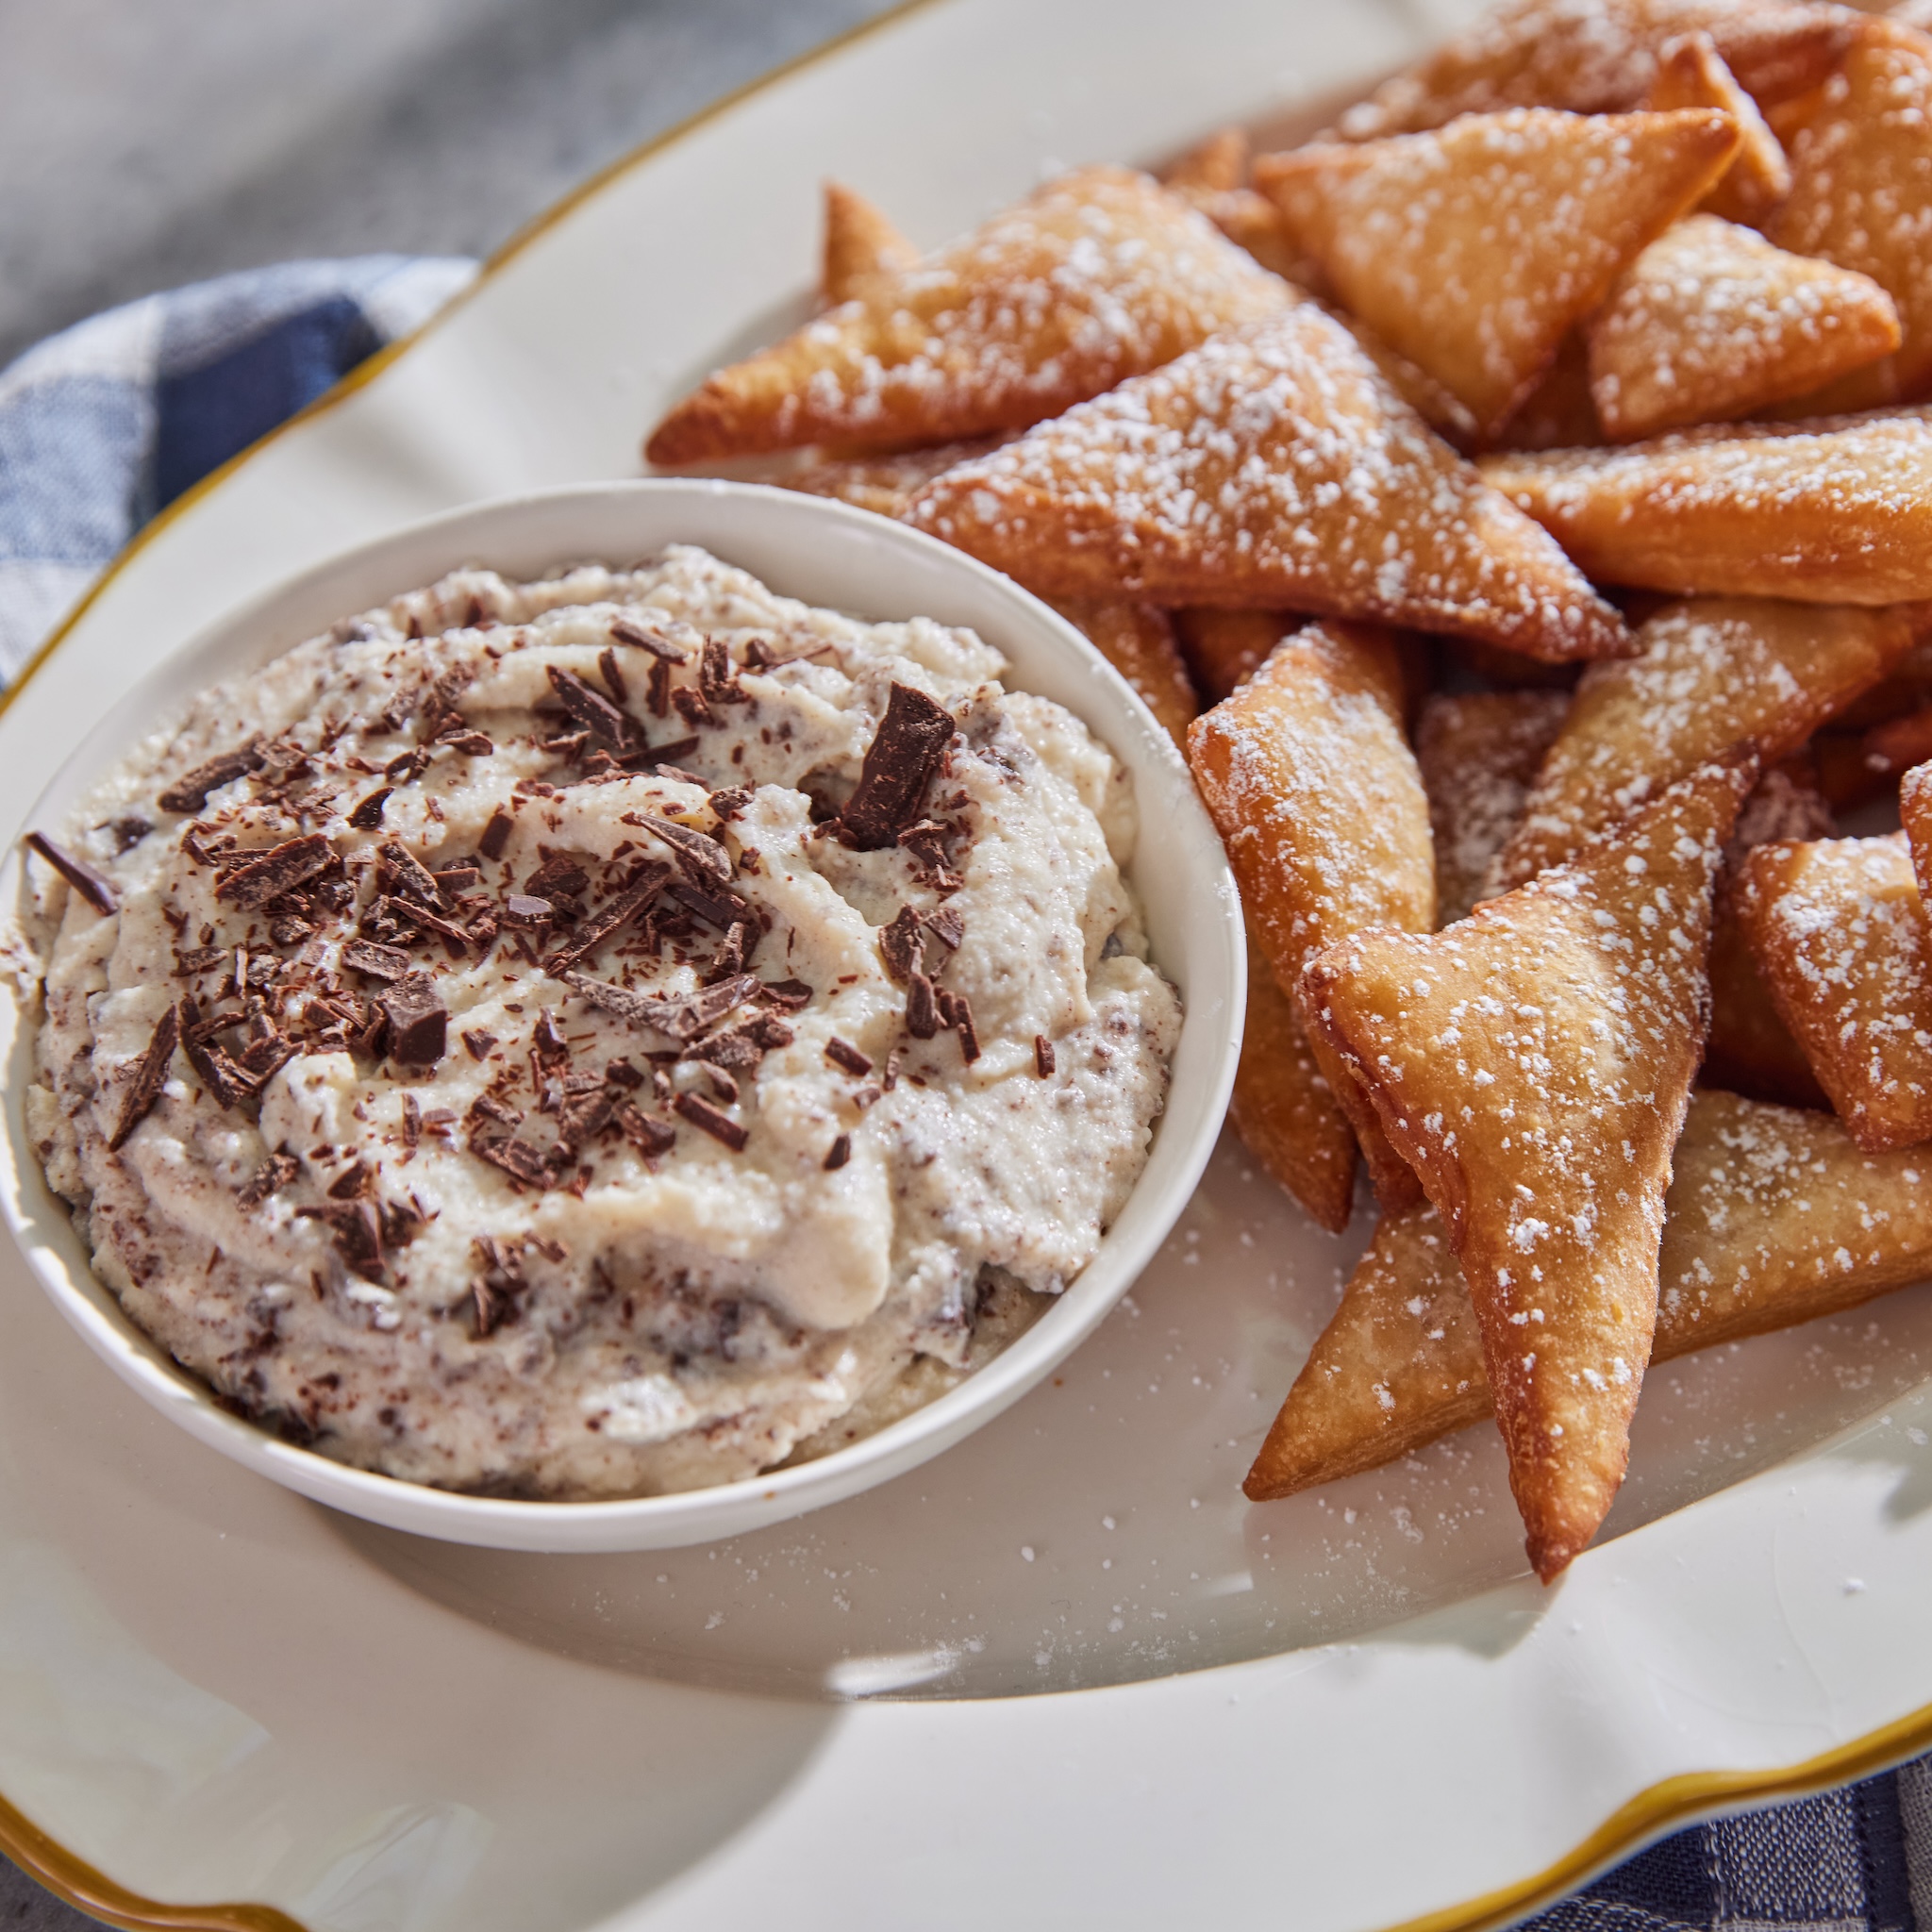 Joanna Gaines' Cannoli Dip + Chips